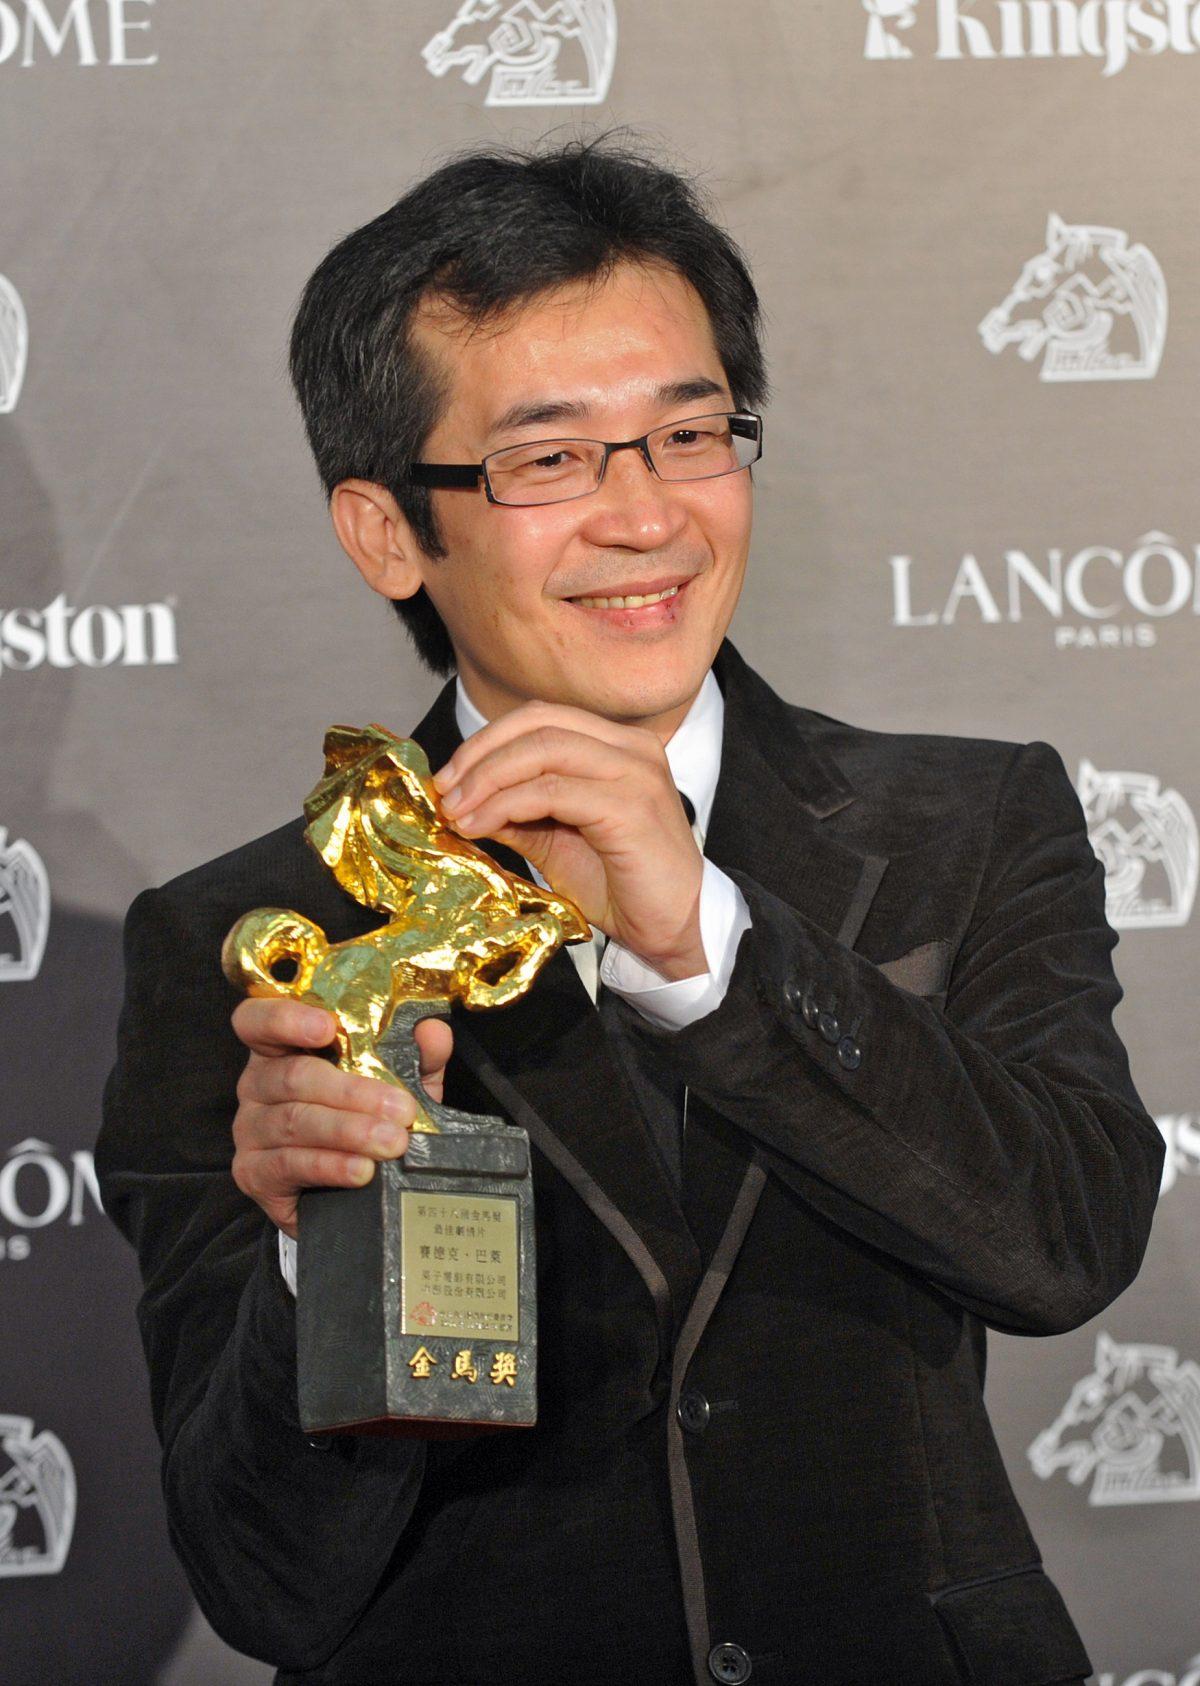 Taiwanese director Wei Te-sheng with the Golden Horse Film Award for Best Feature Film for his "Warriors of the Rainbow: Seediq Bale" on Nov. 26, 2011. (PATRICK LIN/AFP/Getty Images)